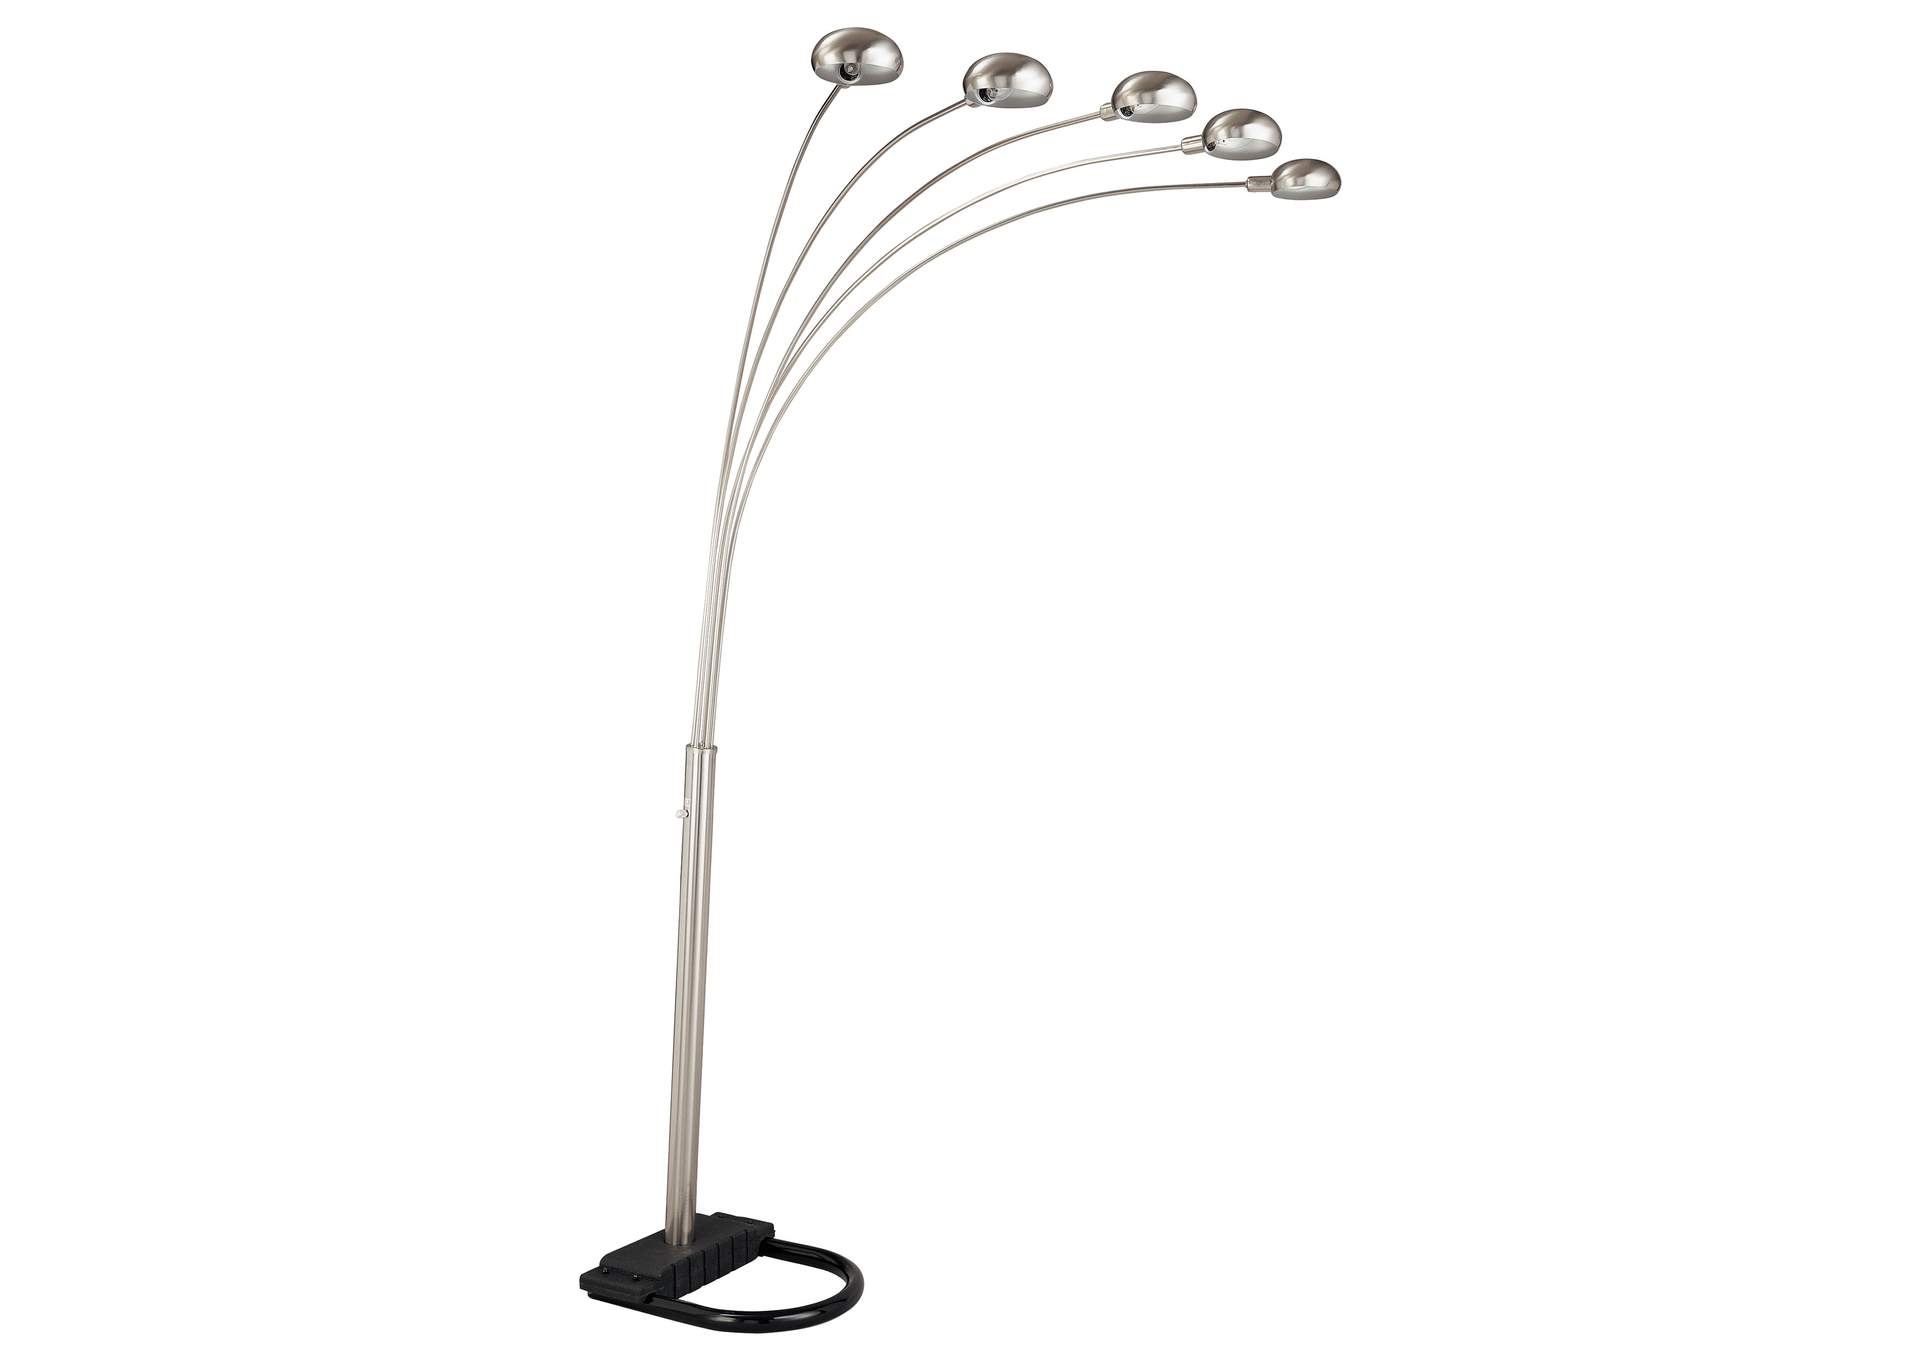 Dacre 5-light Floor Lamp with Curvy Dome Shades Chrome and Black